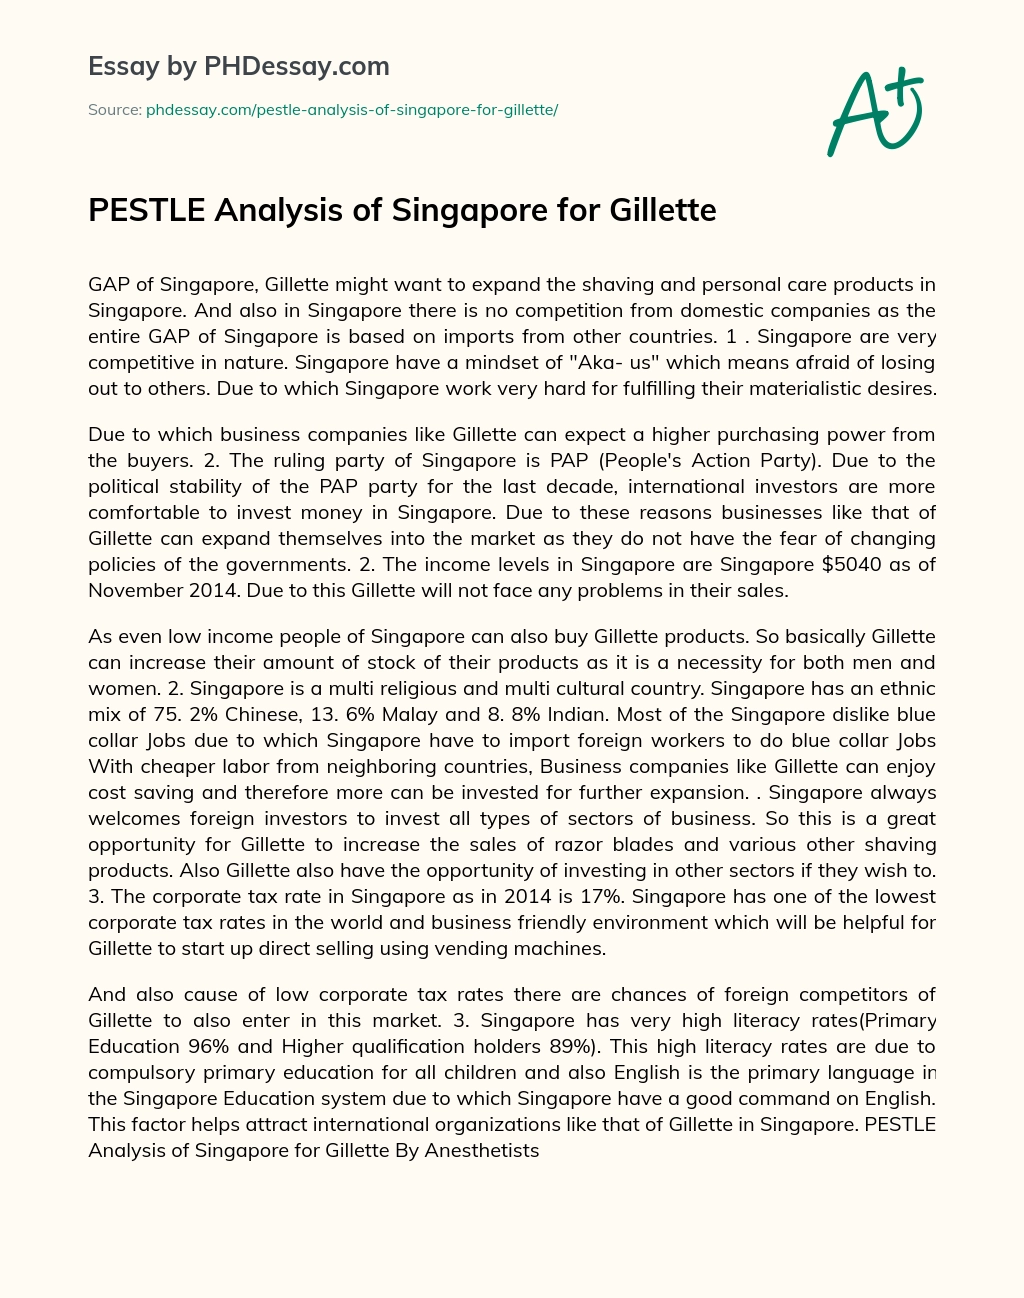 PESTLE Analysis of Singapore for Gillette essay